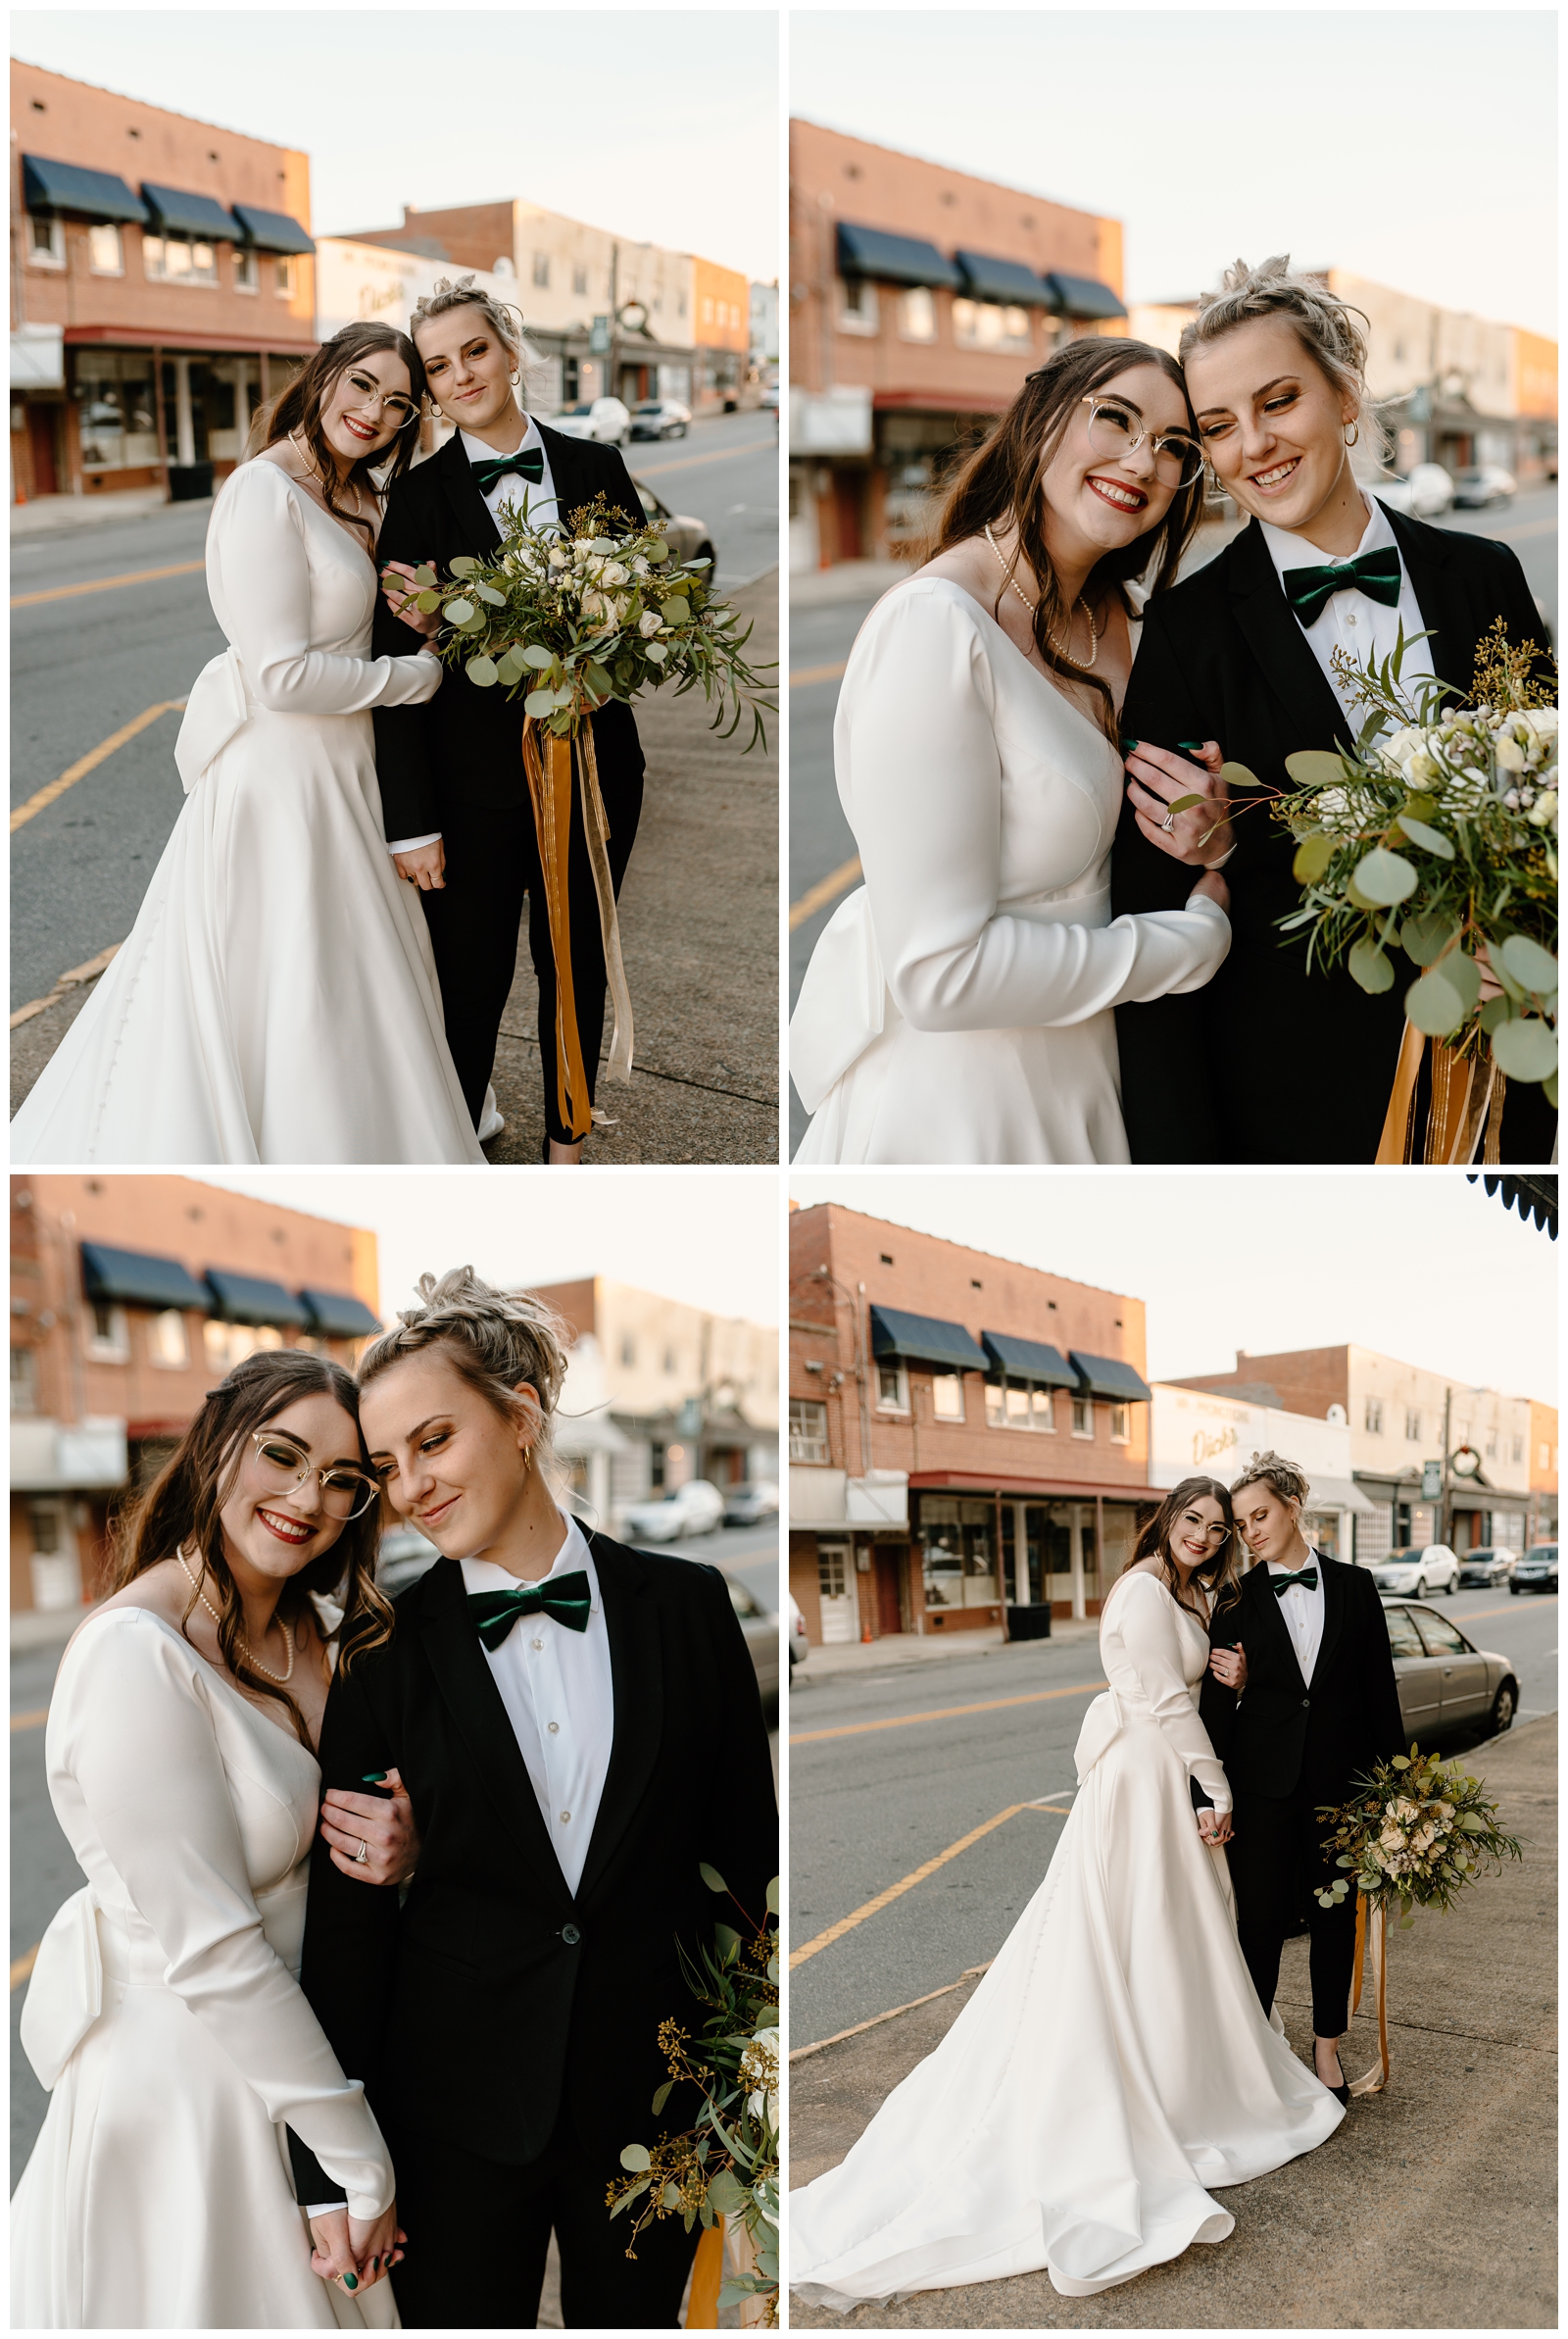 Adorably cozy portraits of newlywed wives on their elopement day by Greensboro NC photographer